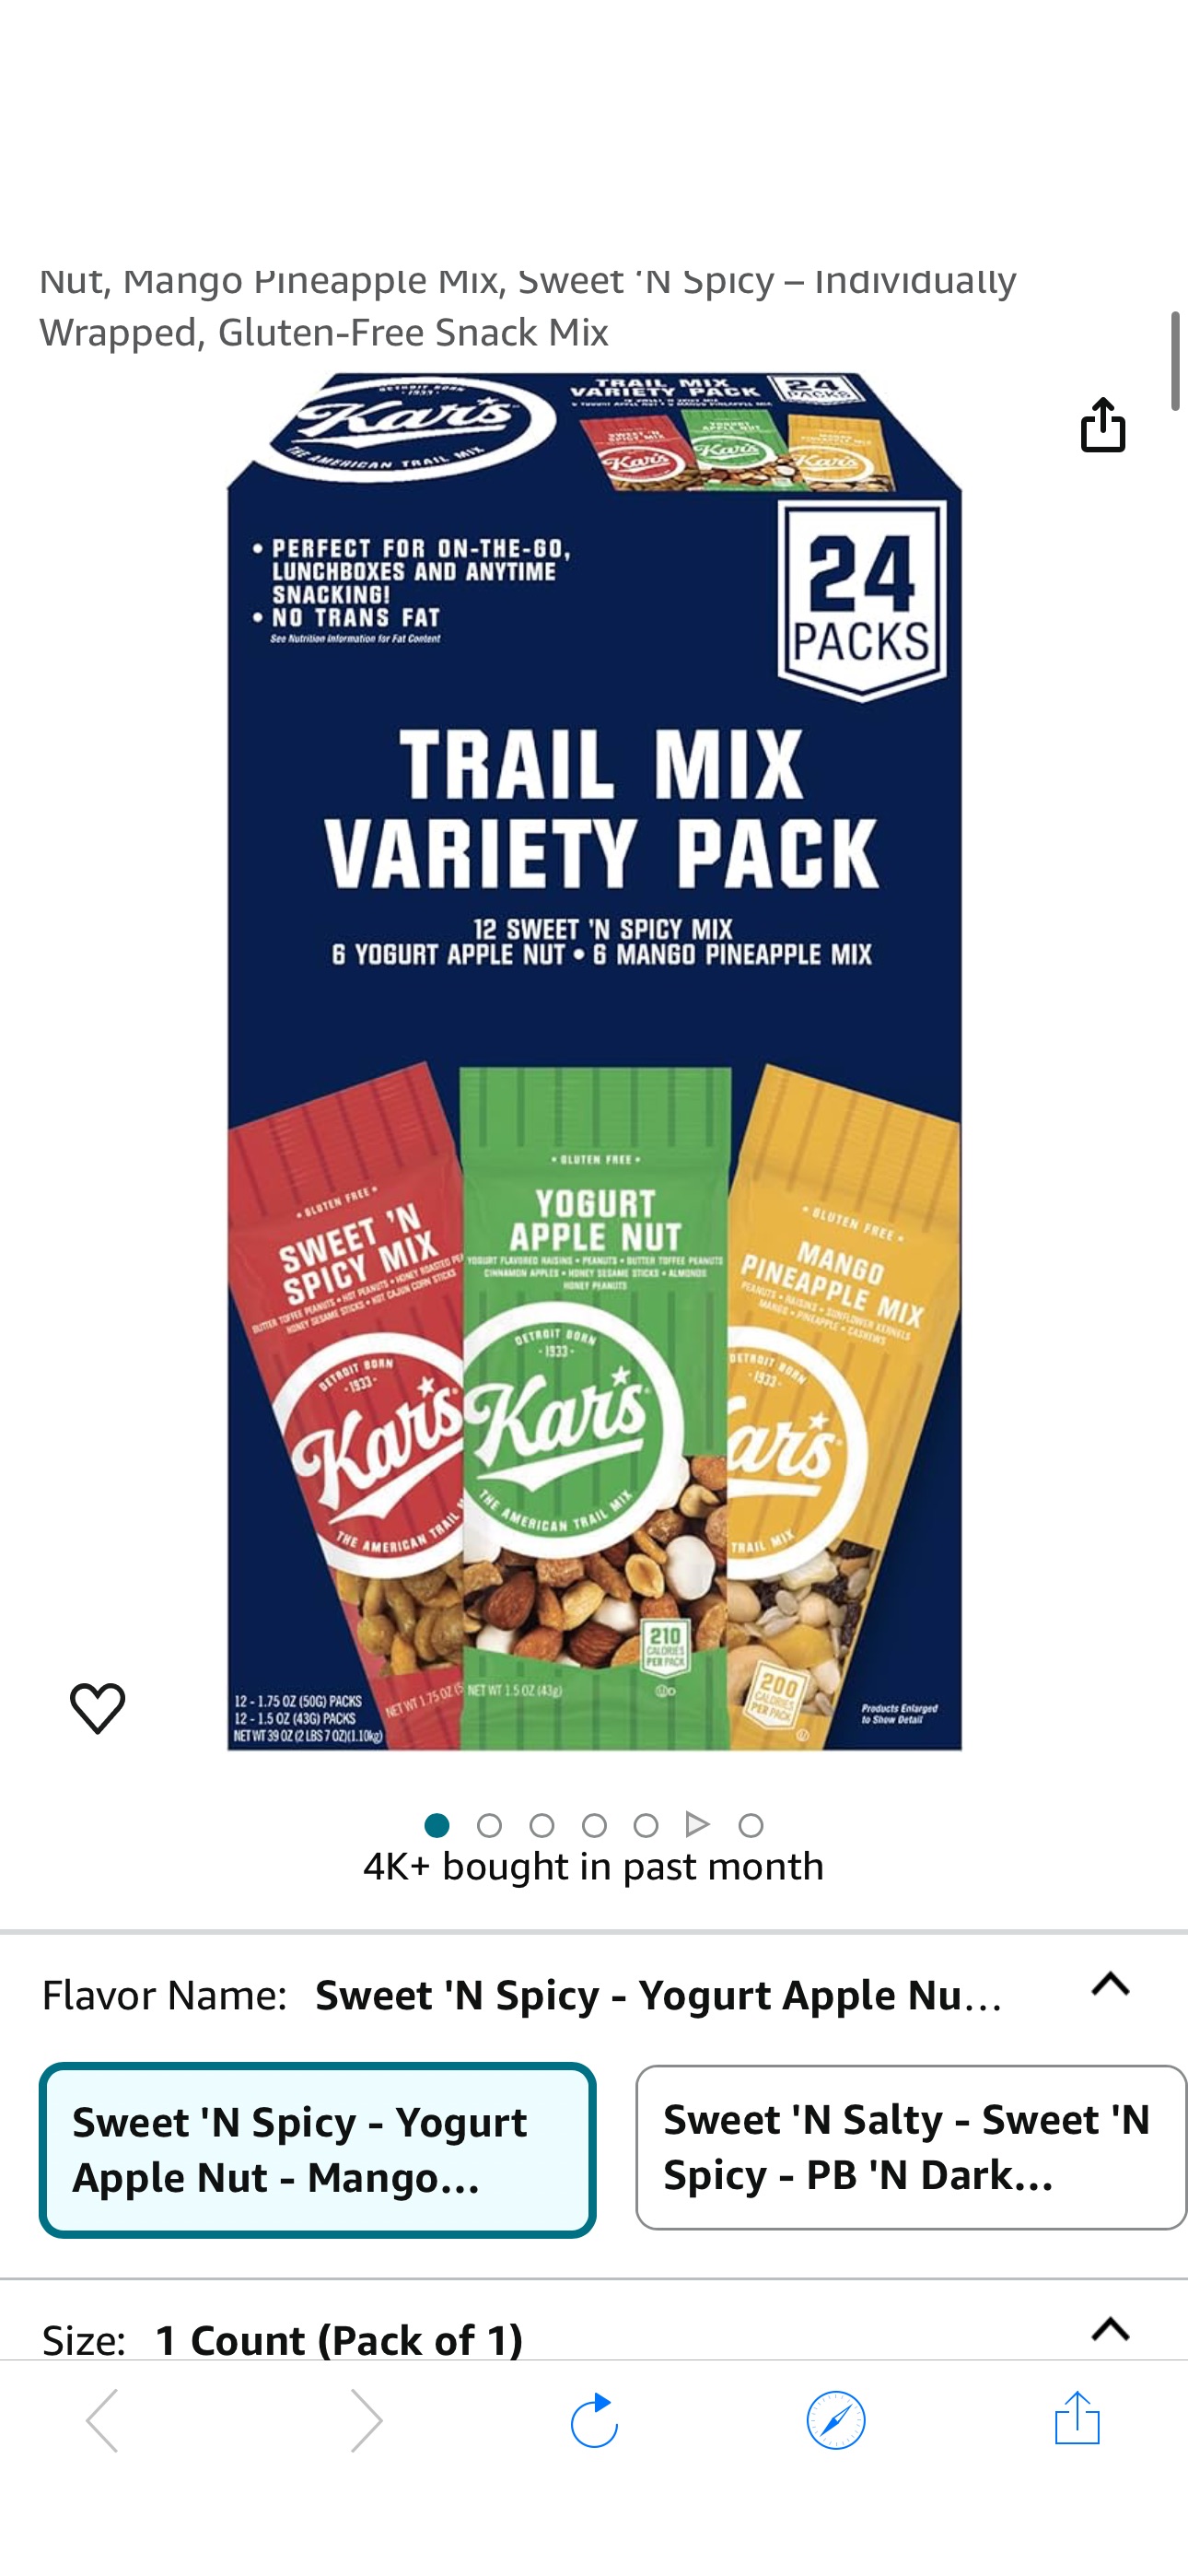 Amazon.com: Kar’s Nuts Trail Mix Variety Pack, Pack of 24 – Yogurt Apple Nut, Mango Pineapple Mix, Sweet ‘N Spicy – Individually Wrapped, Gluten-Free Snack Mix : Grocery & Gourmet Food